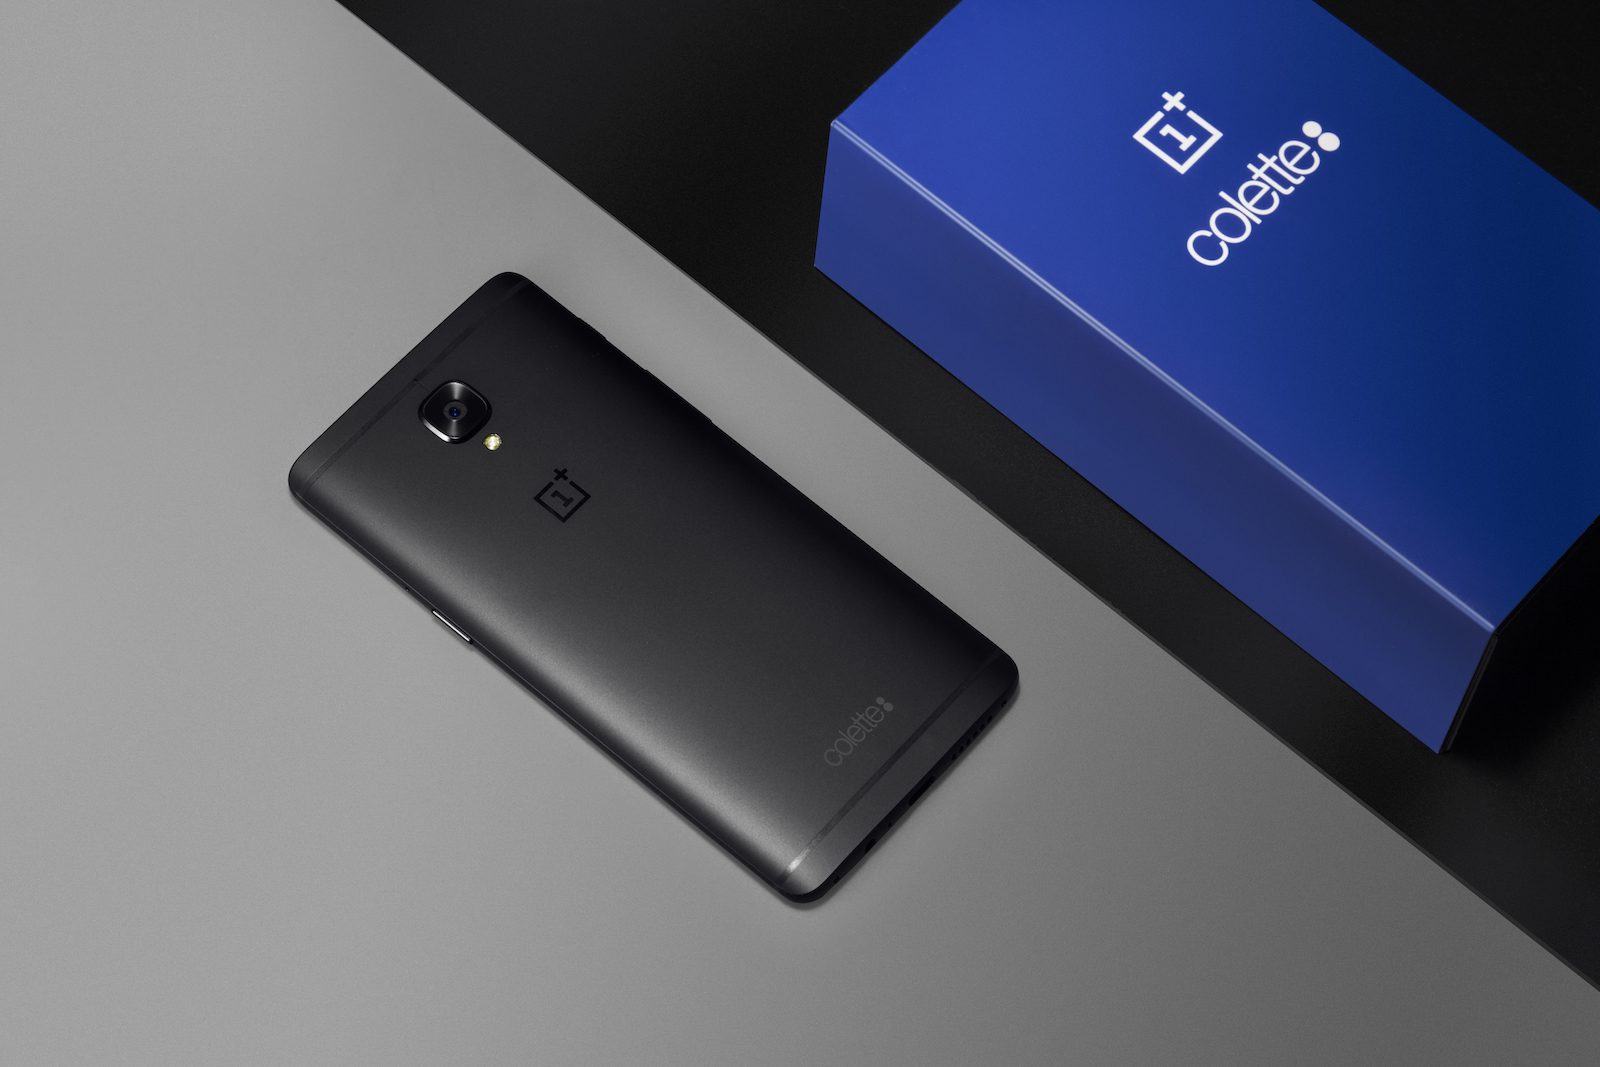 Limited edition Black OnePlus 3T colette box